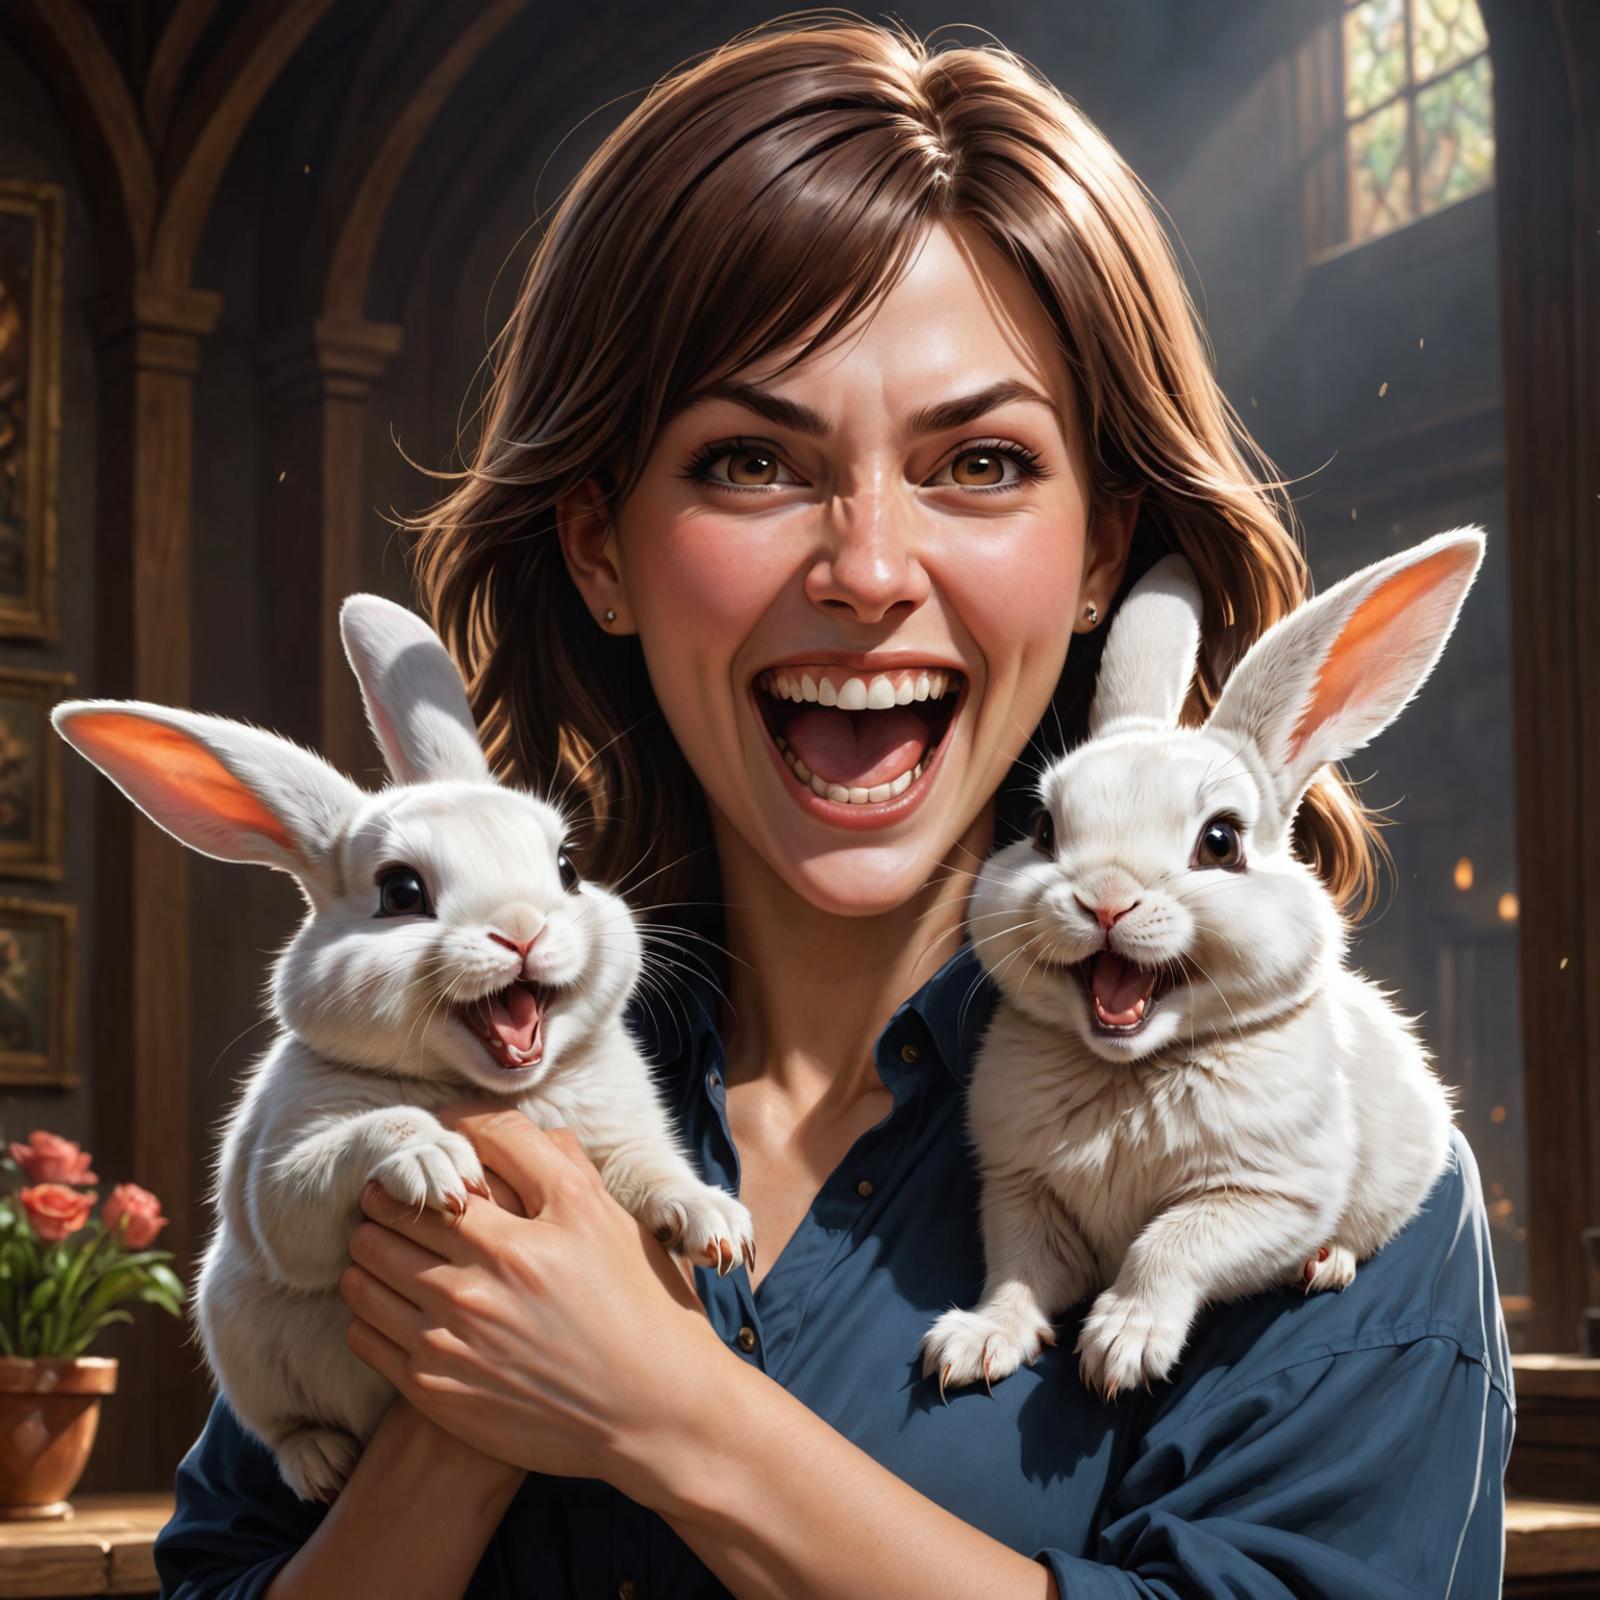 A woman holding two bunnies and smiling.